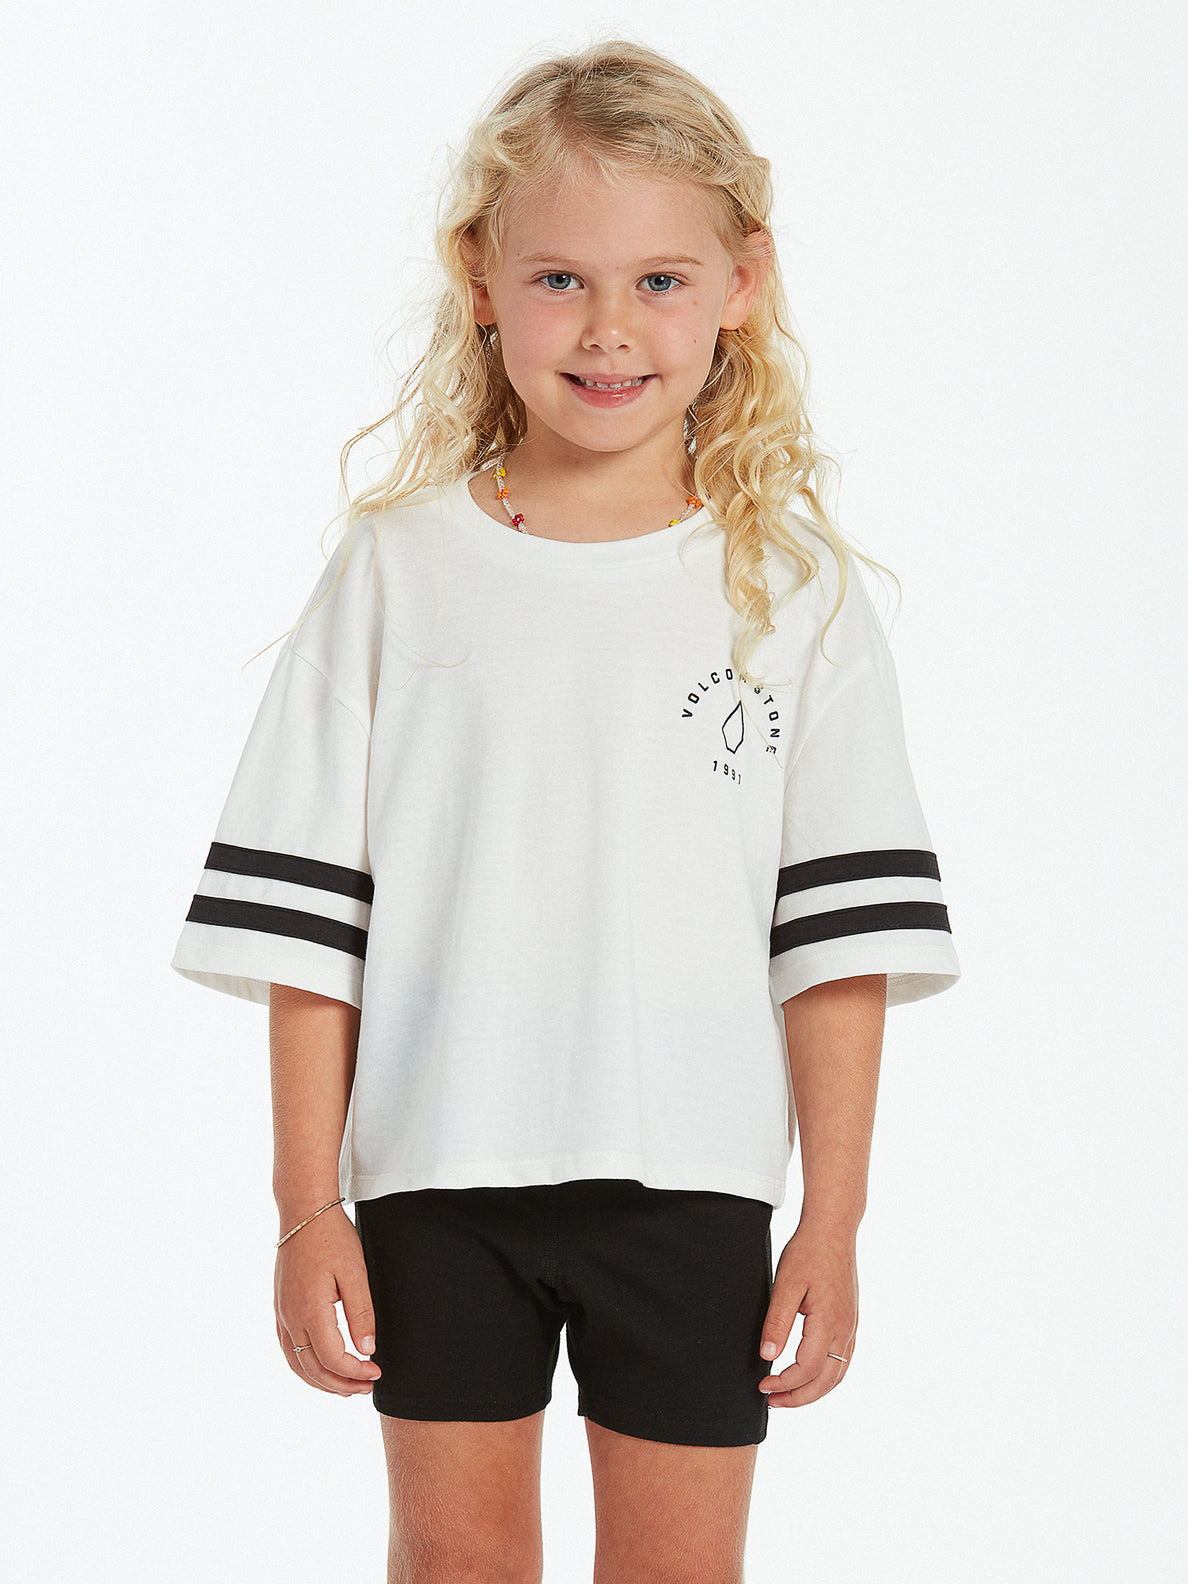 Girls Truly Stoked Short Sleeve Tee - Star White (R3512201_SWH) [2]